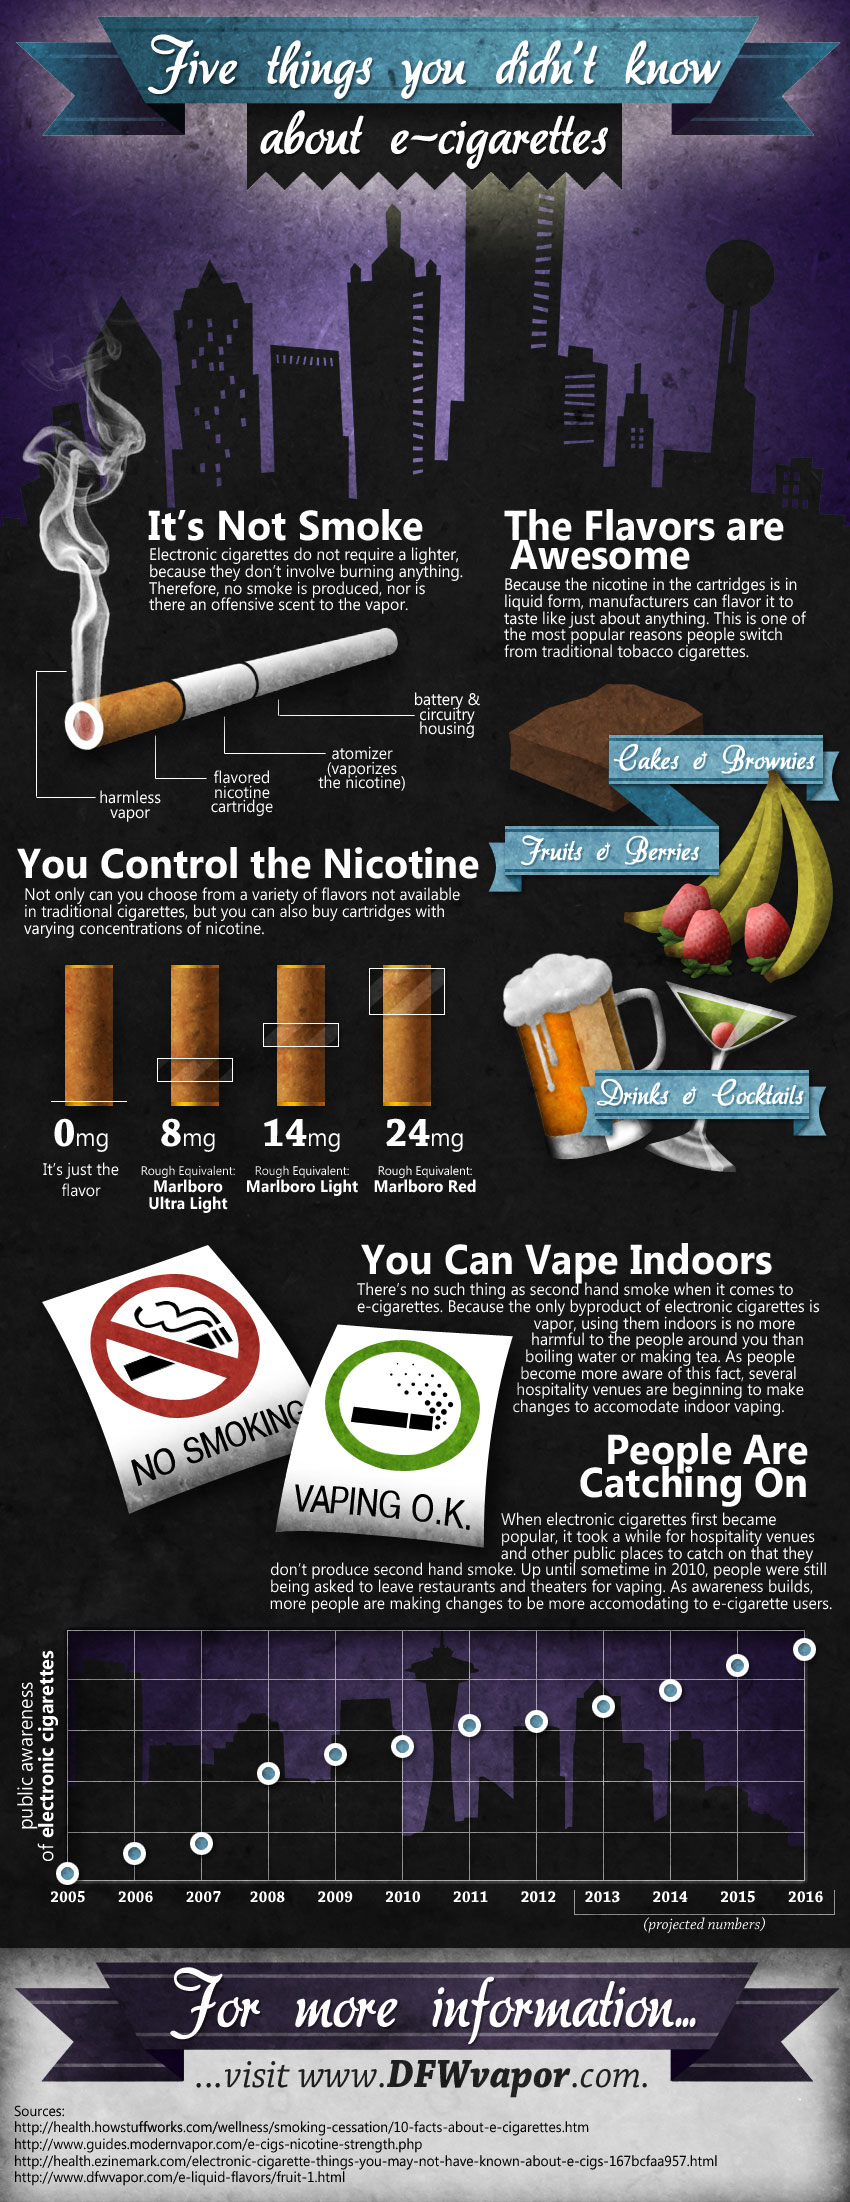 Facts-About-E-Cigarettes-Infographic